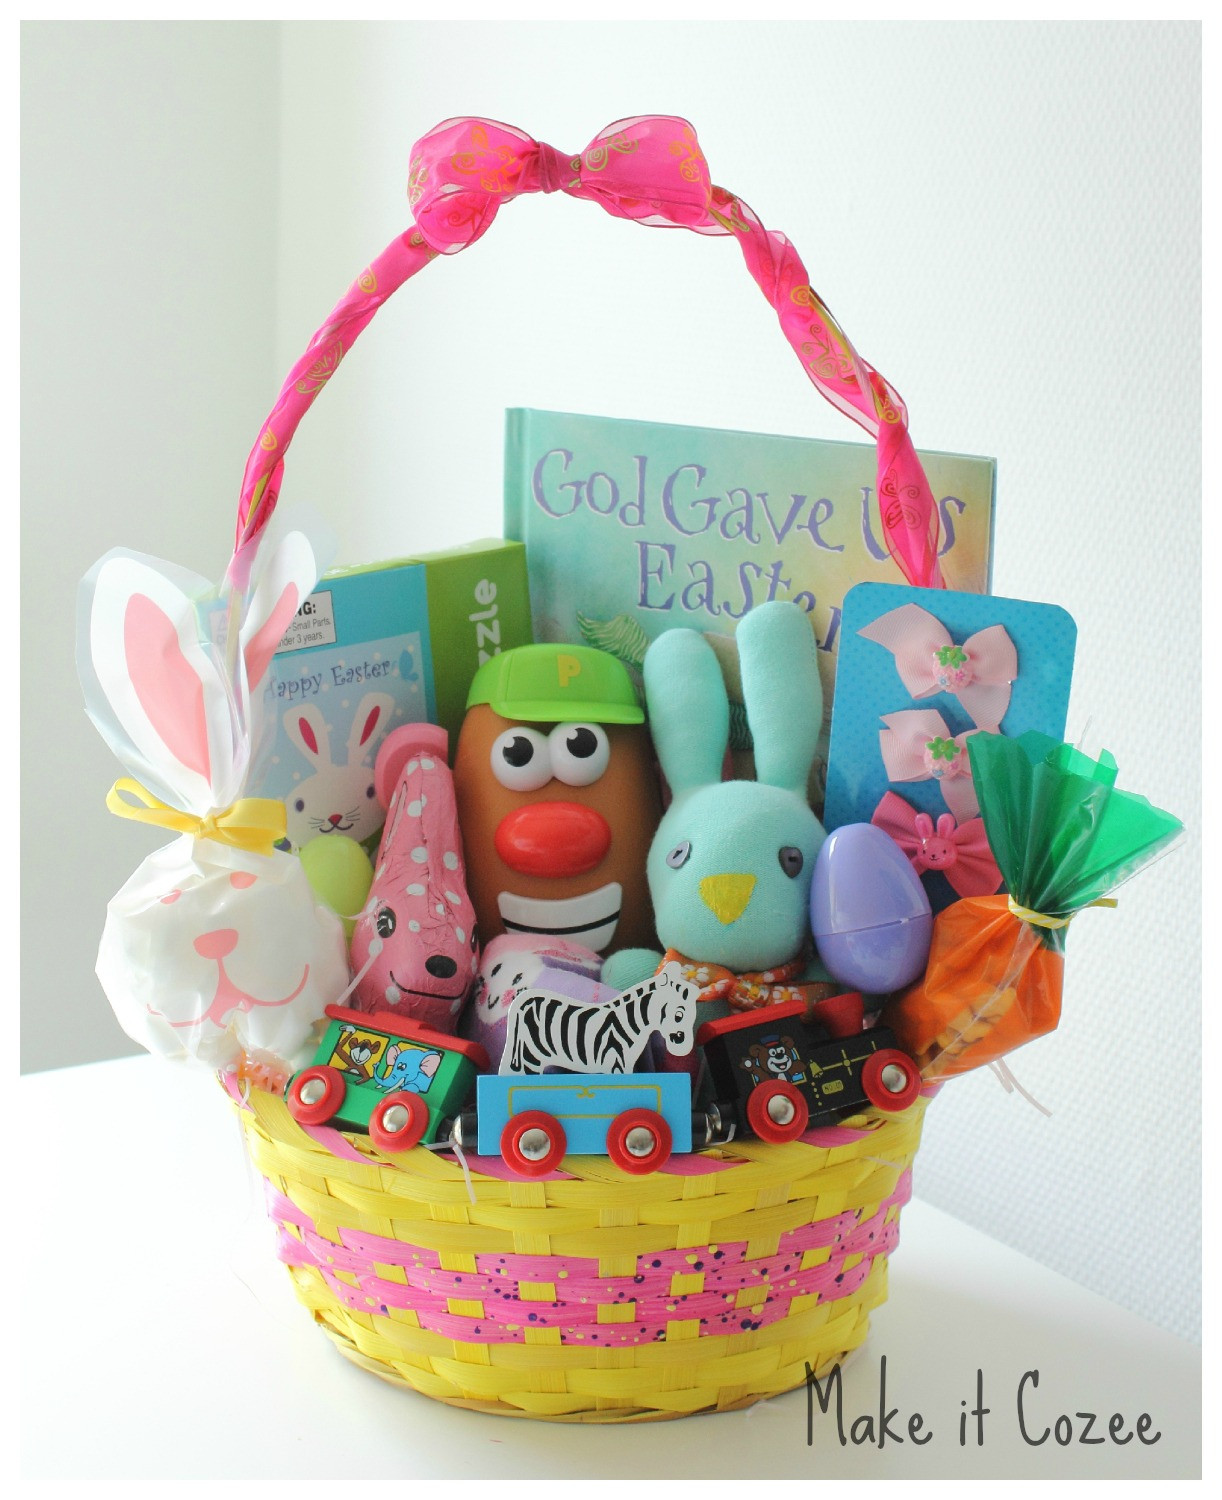 Best Easter Gifts For Toddlers
 Make it Cozee Toddler Easter Basket